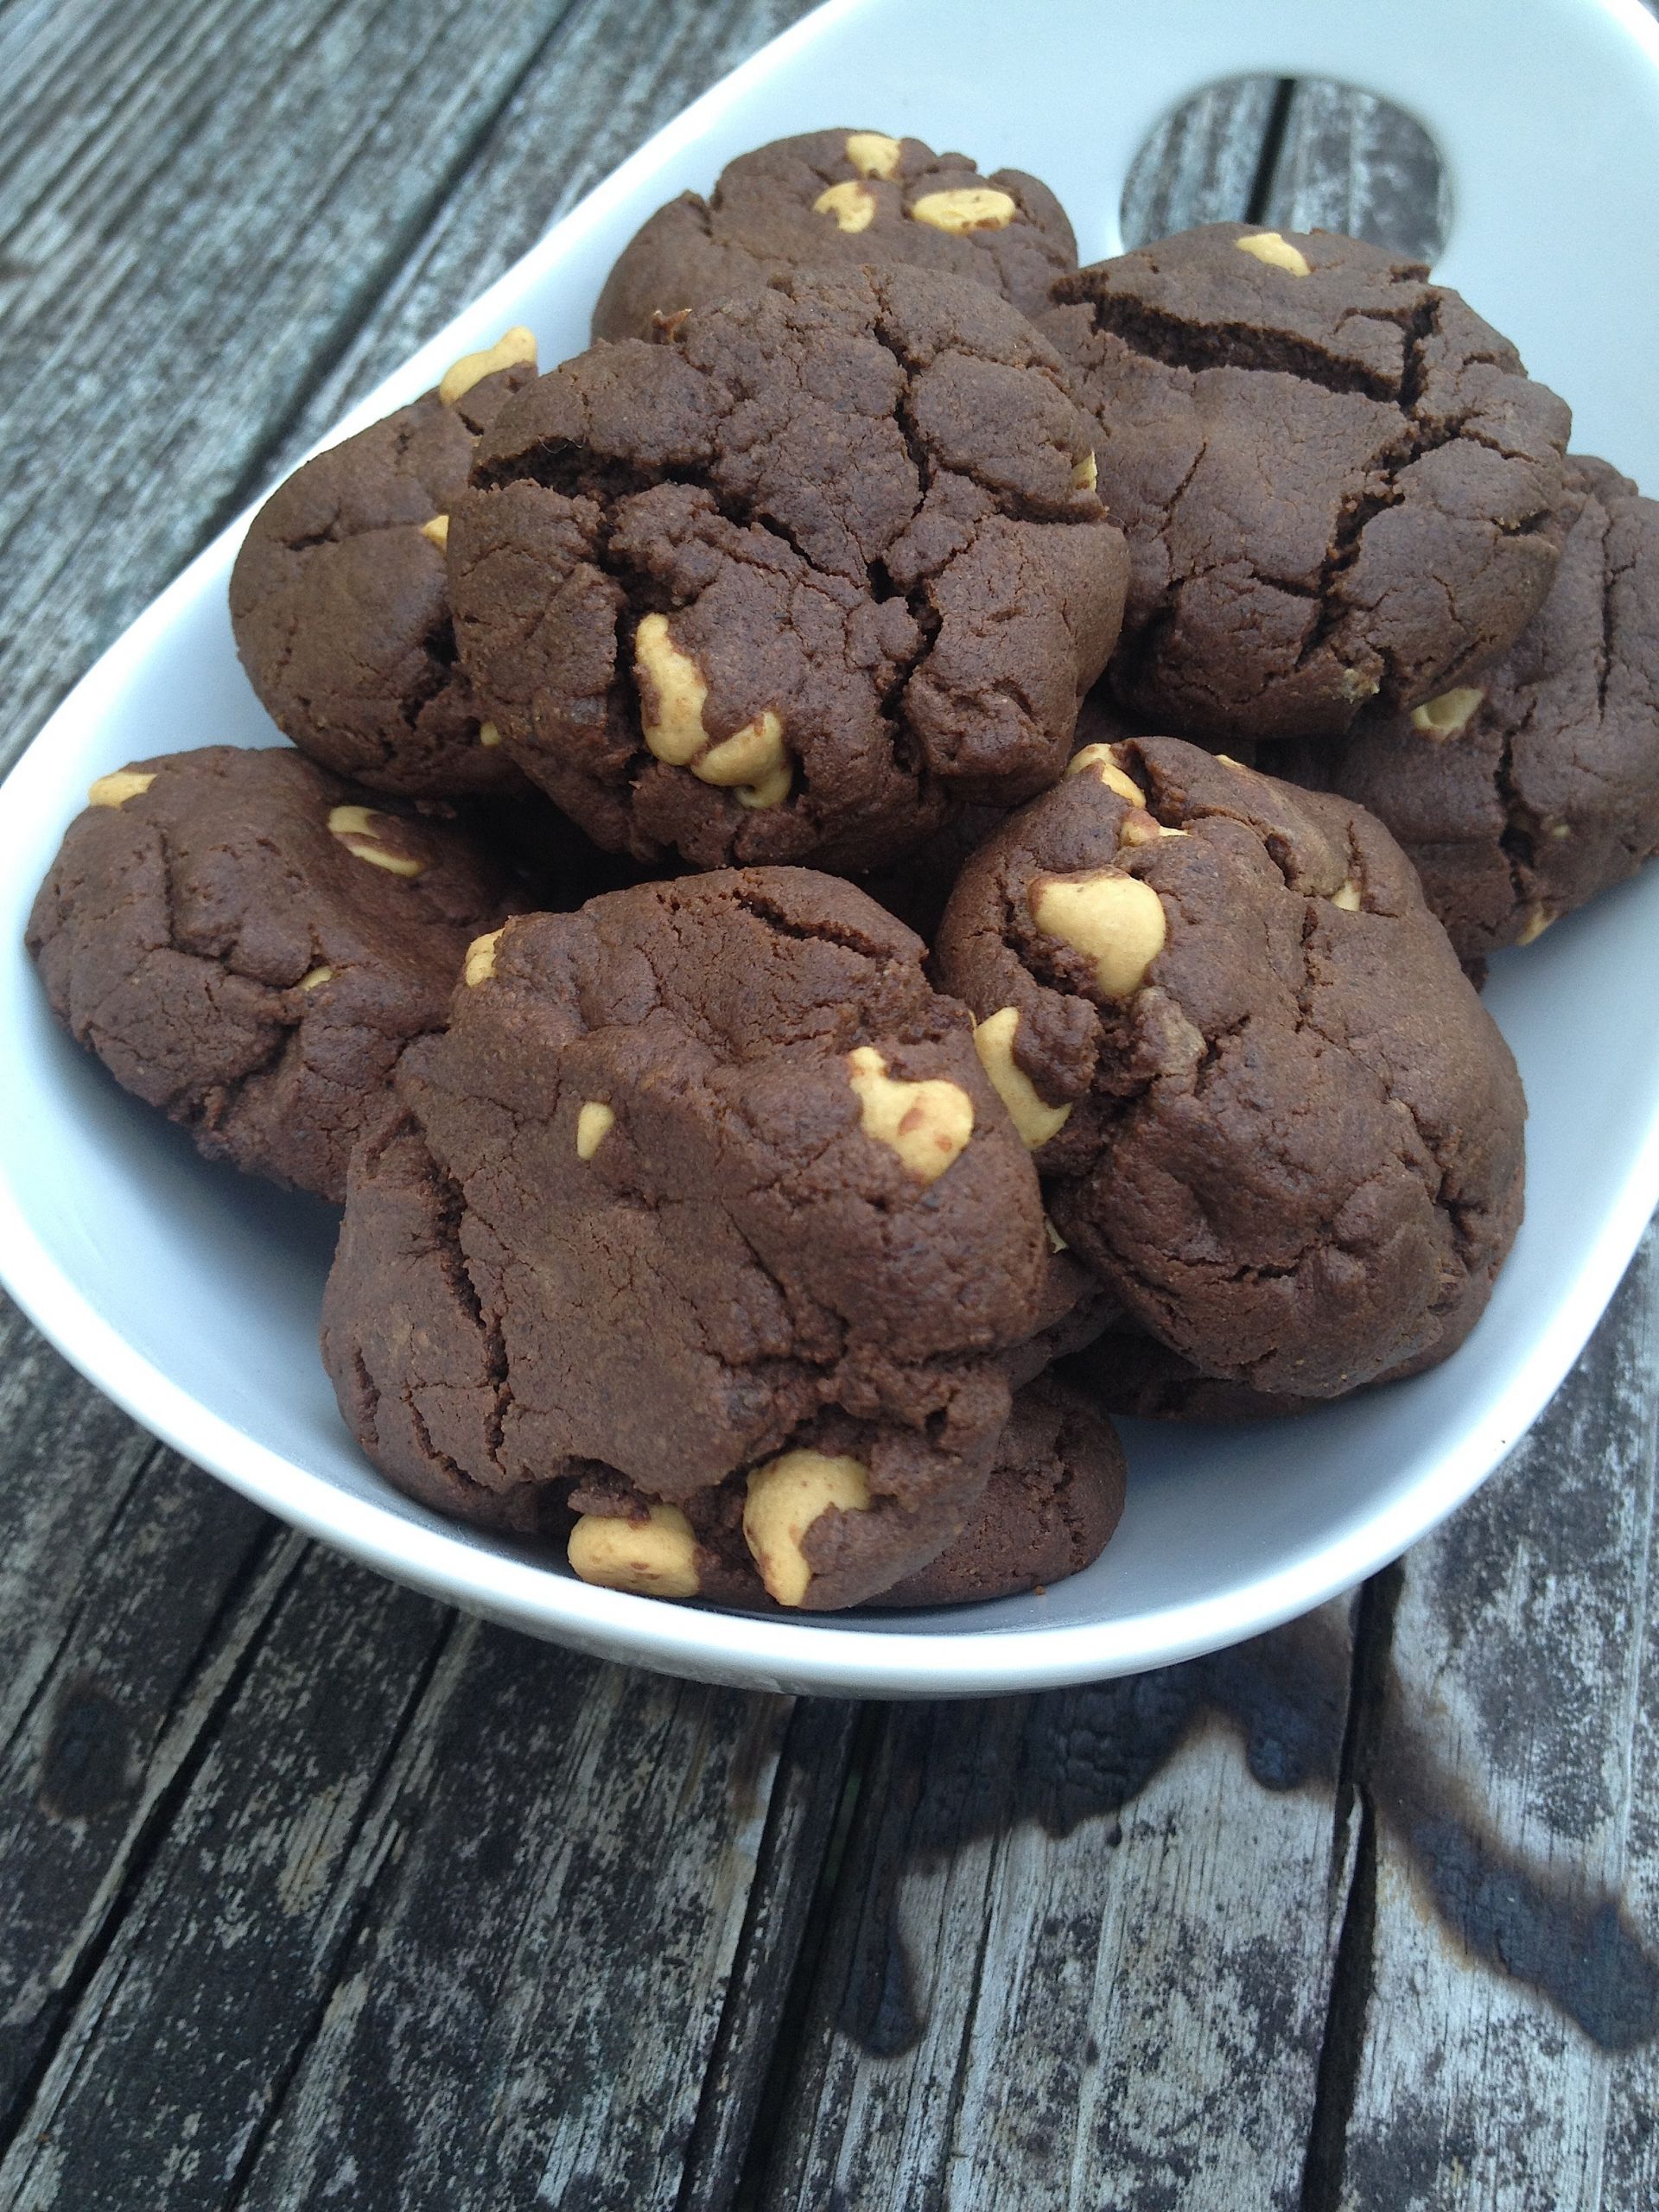 Peanut Butter Cookies With Peanut Butter Chips
 Flourless Chocolate Peanut Butter Chip Cookies